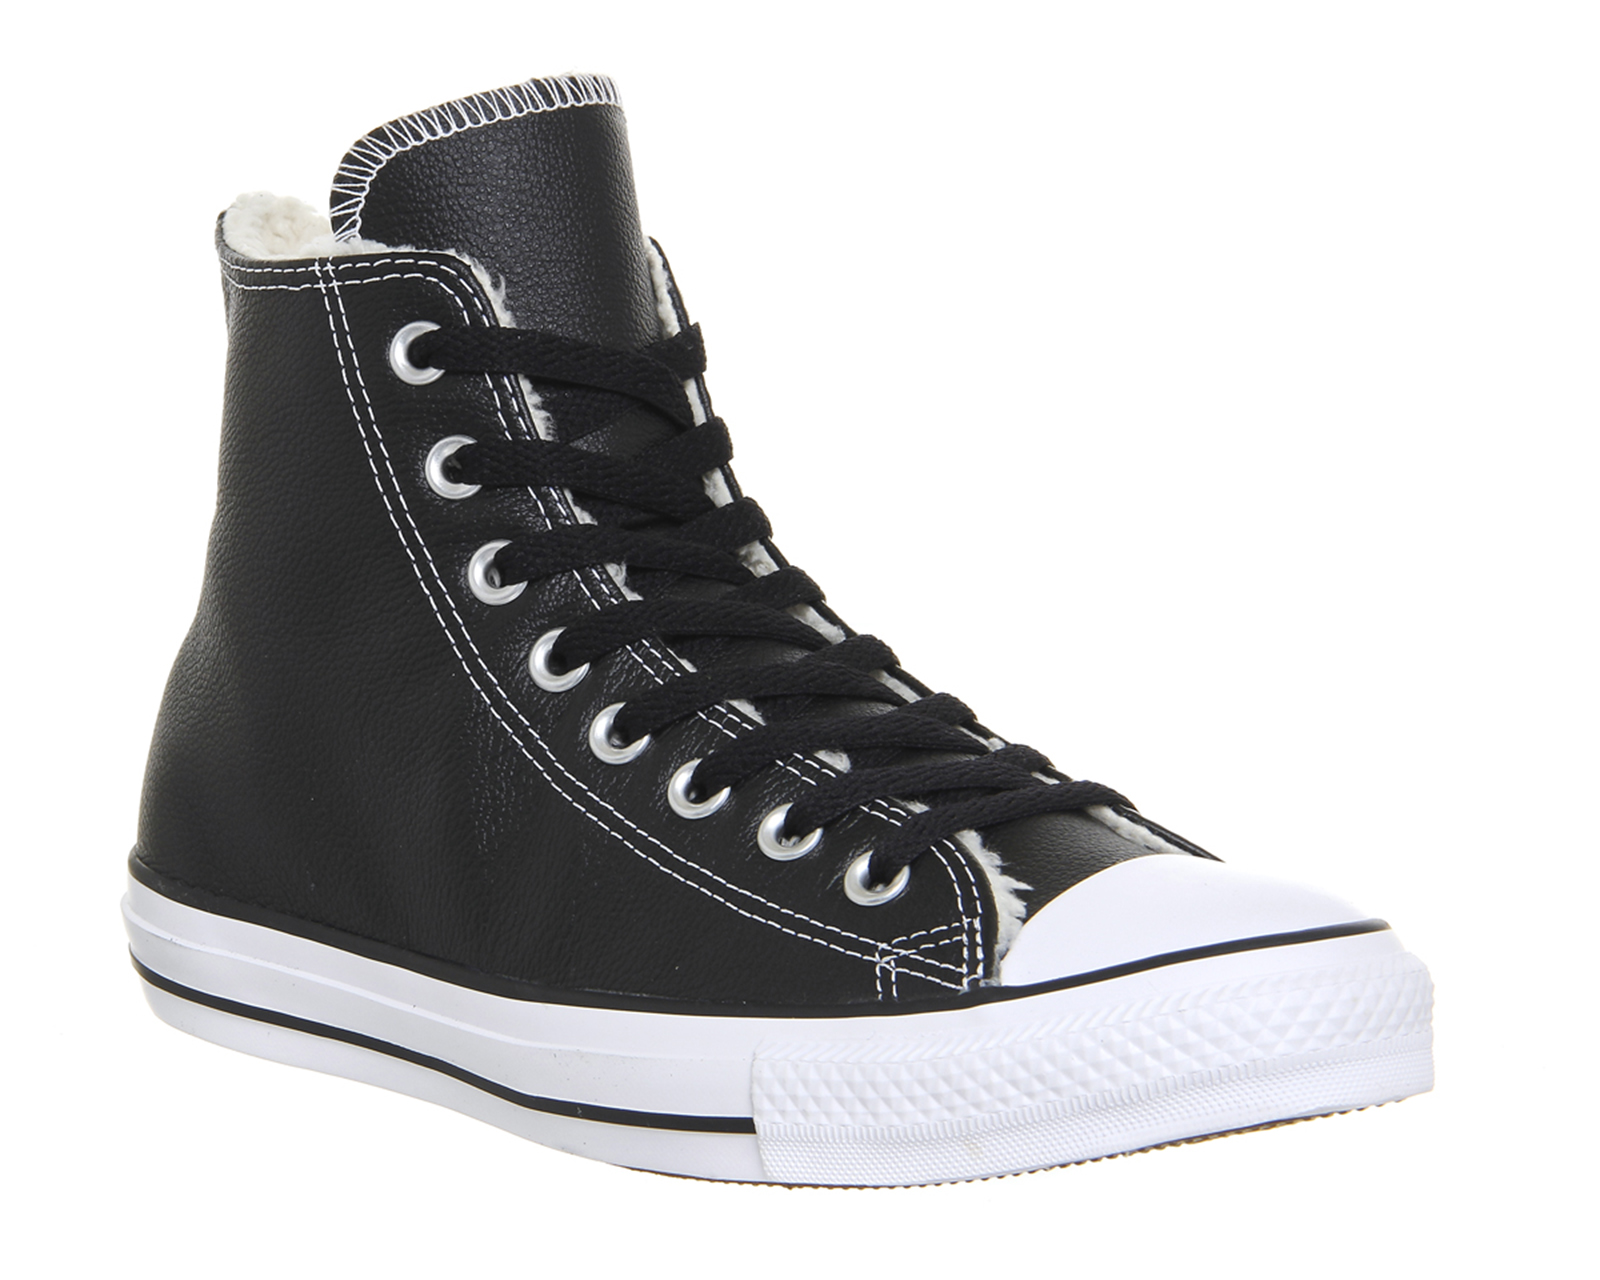 converse all star hi leather white